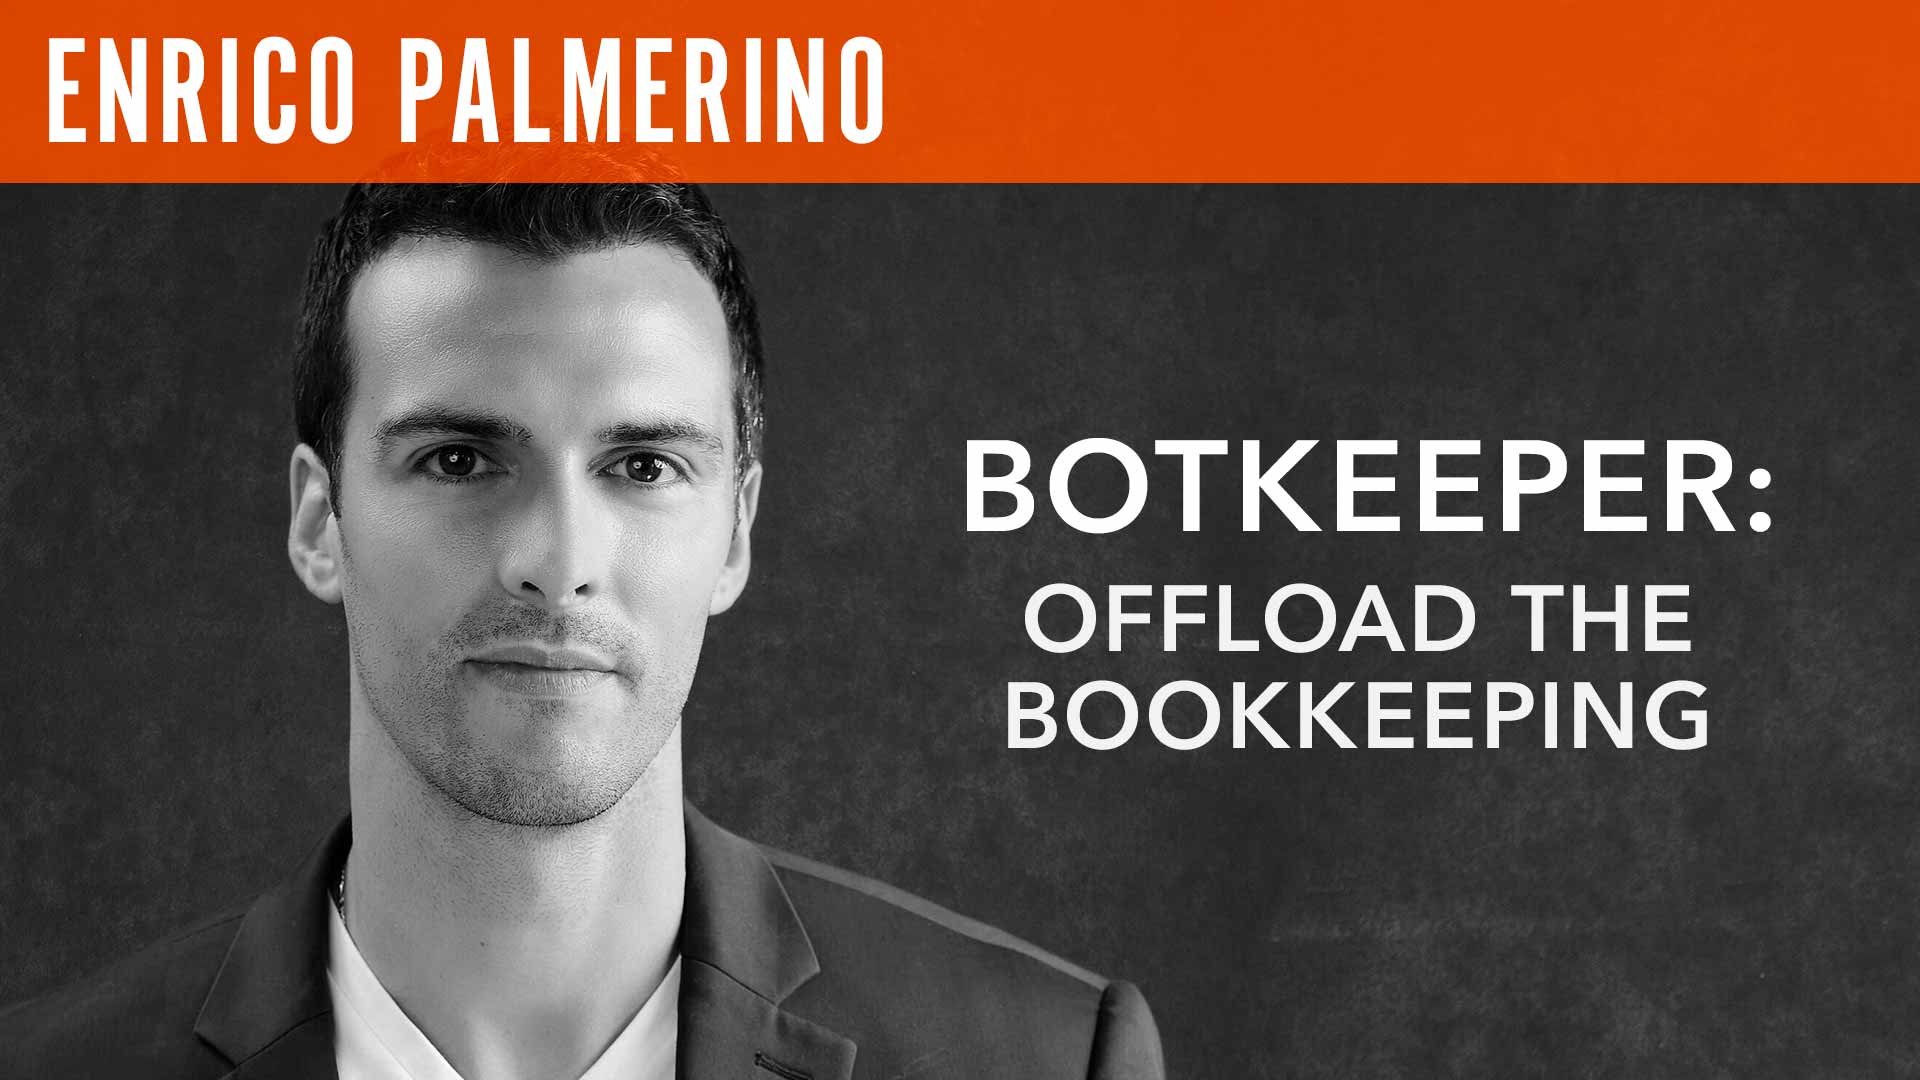 Enrico Palmerino, "Botkeeper: Offload the Bookkeeping"